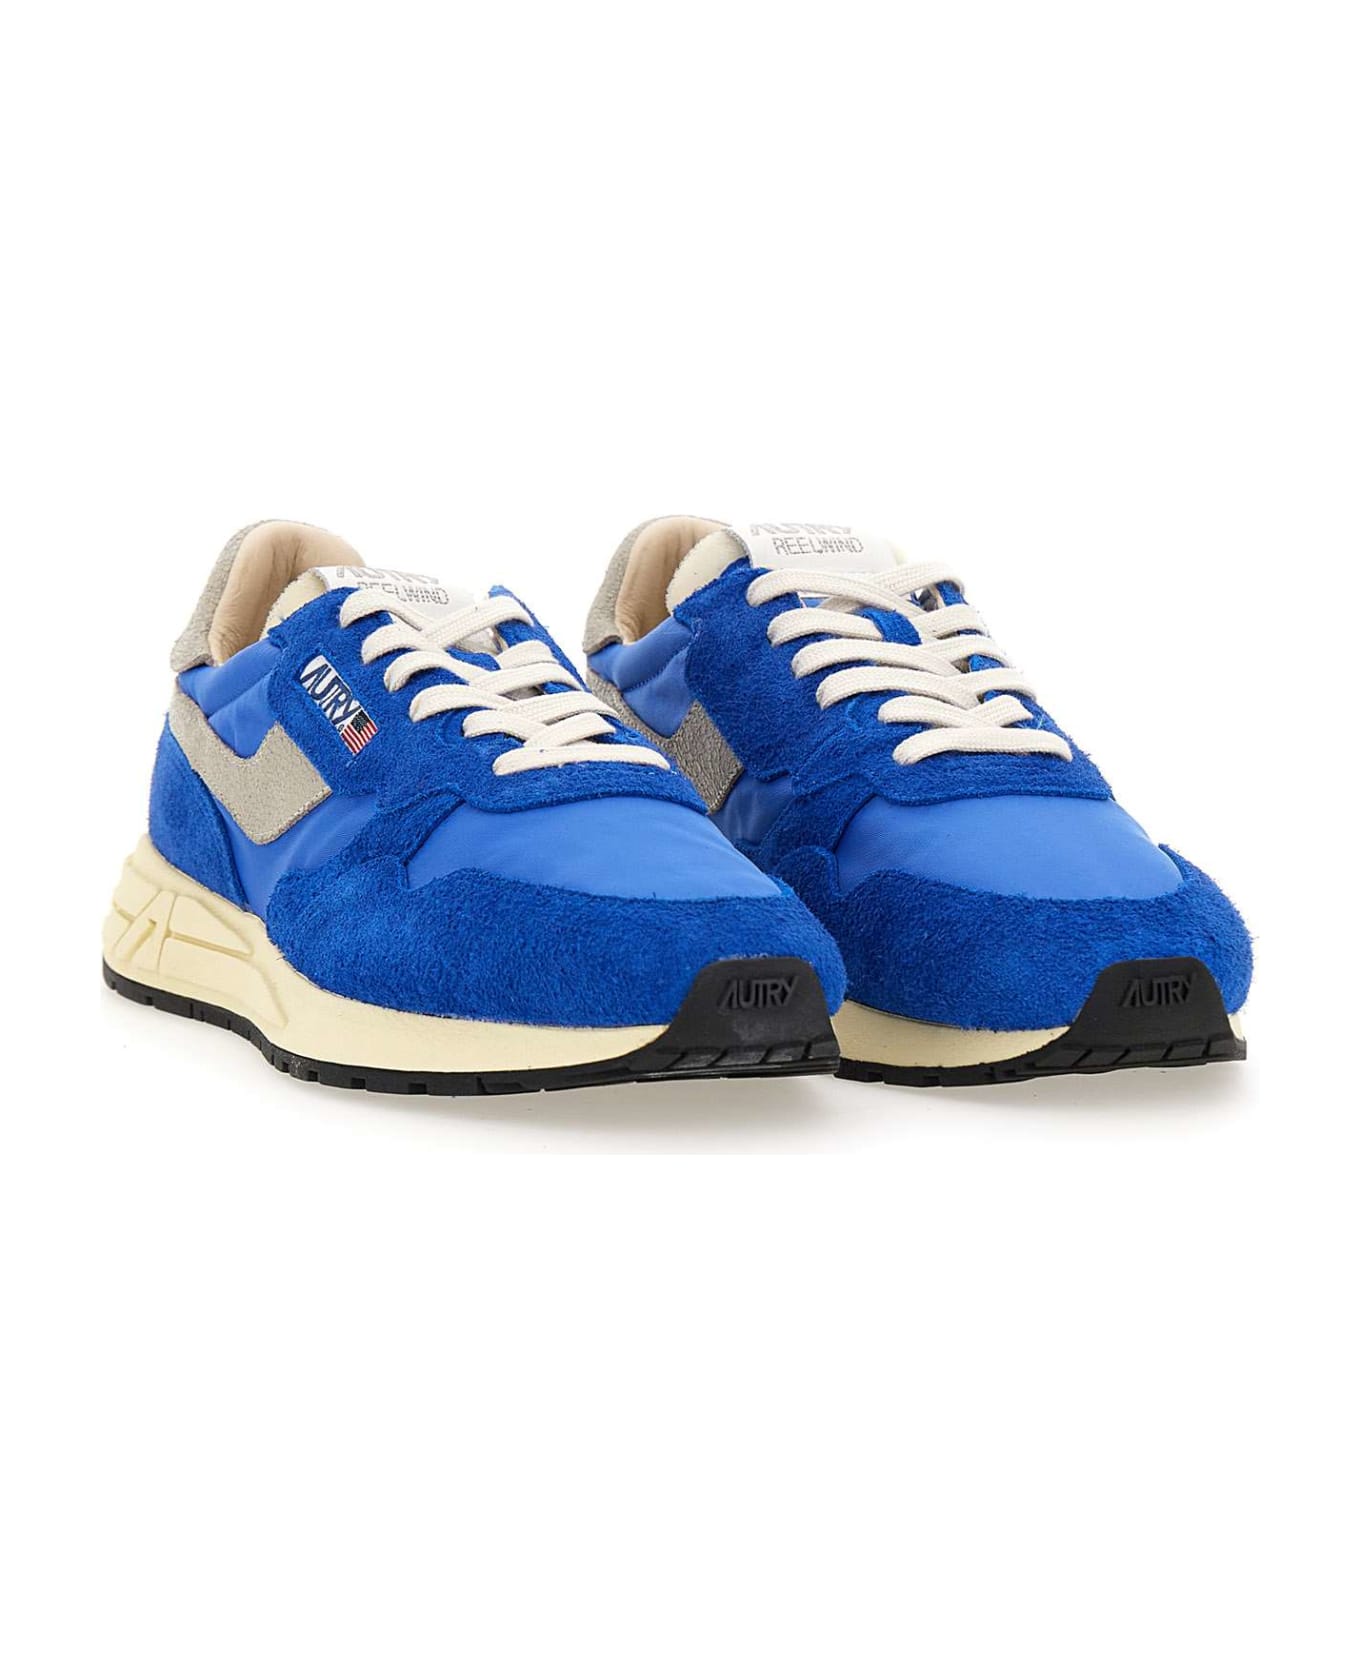 Autry "wwlm Nc02" Sneakers - WHITE-BLUE